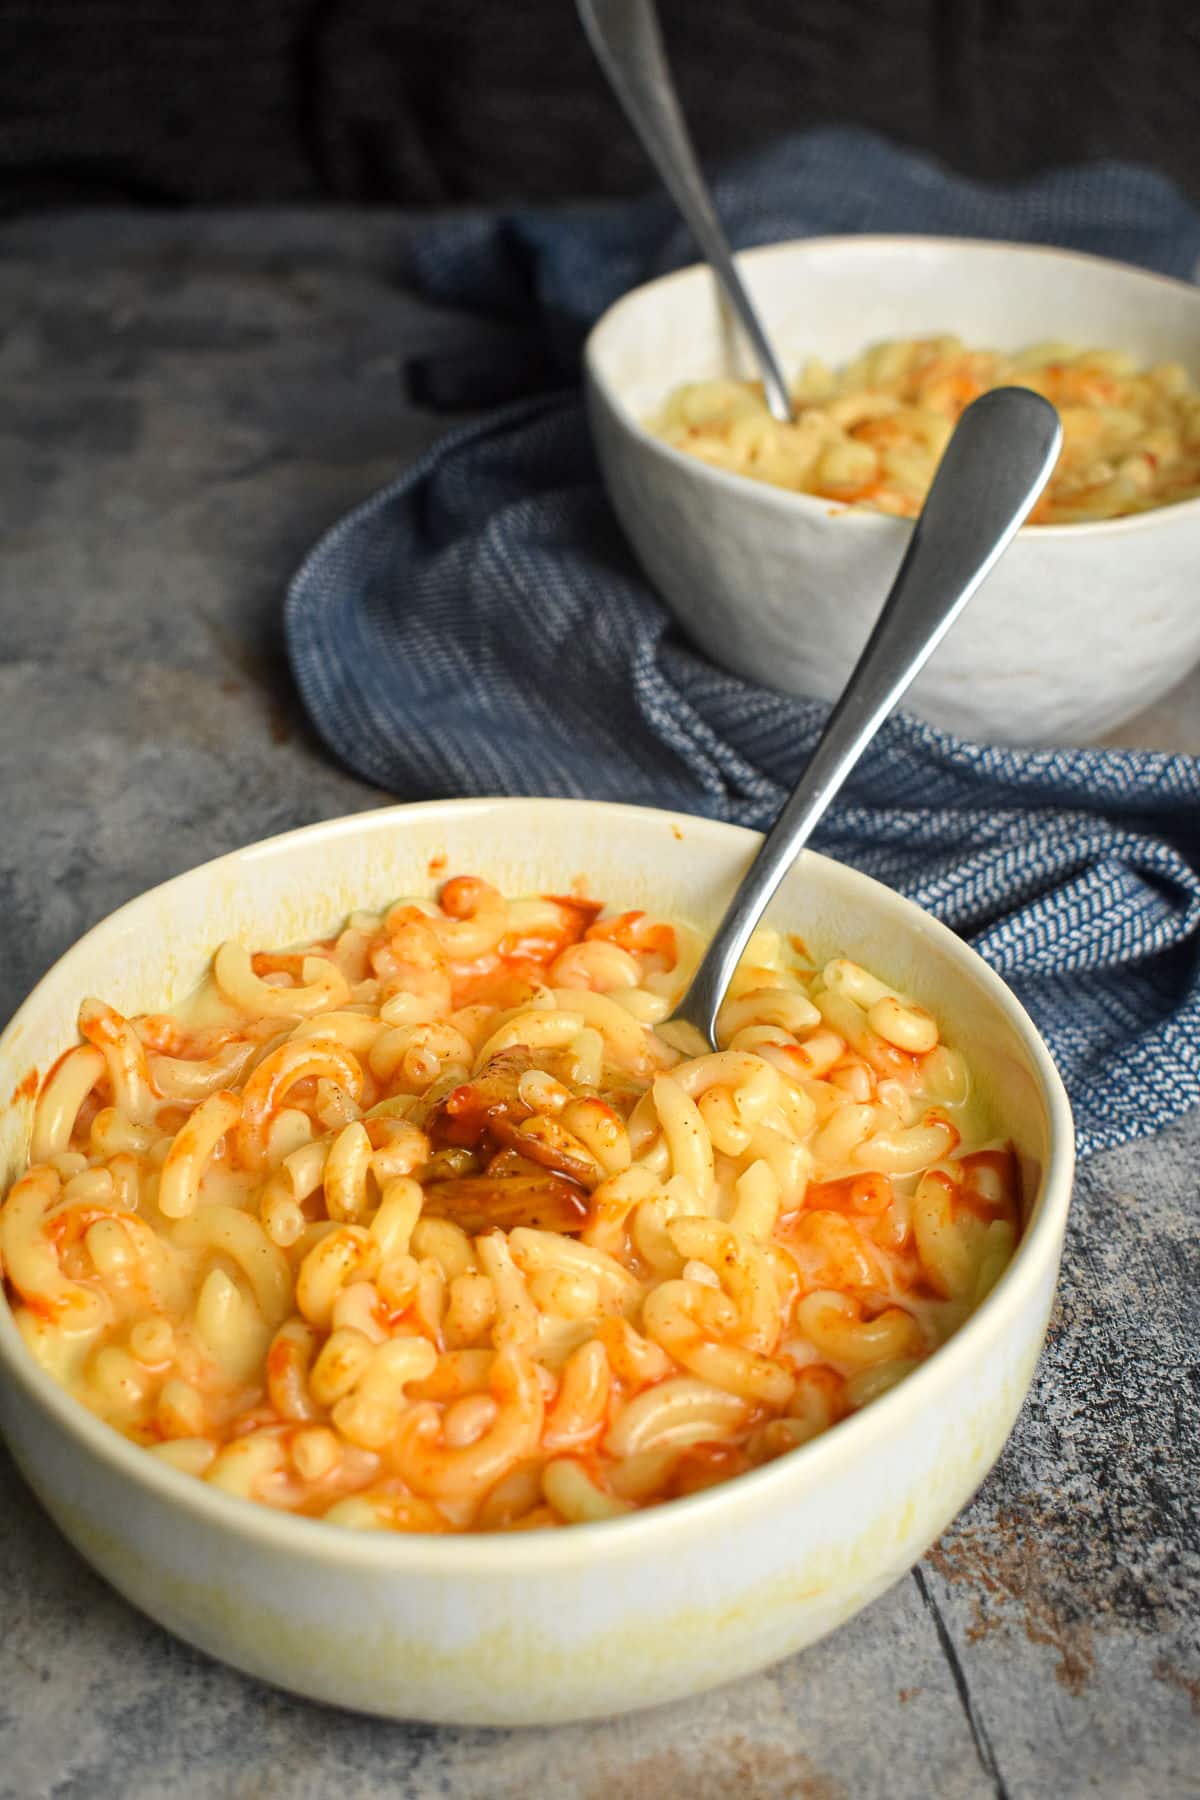 Kimchi mac and cheese in bowls with spoons on blue-grey background.